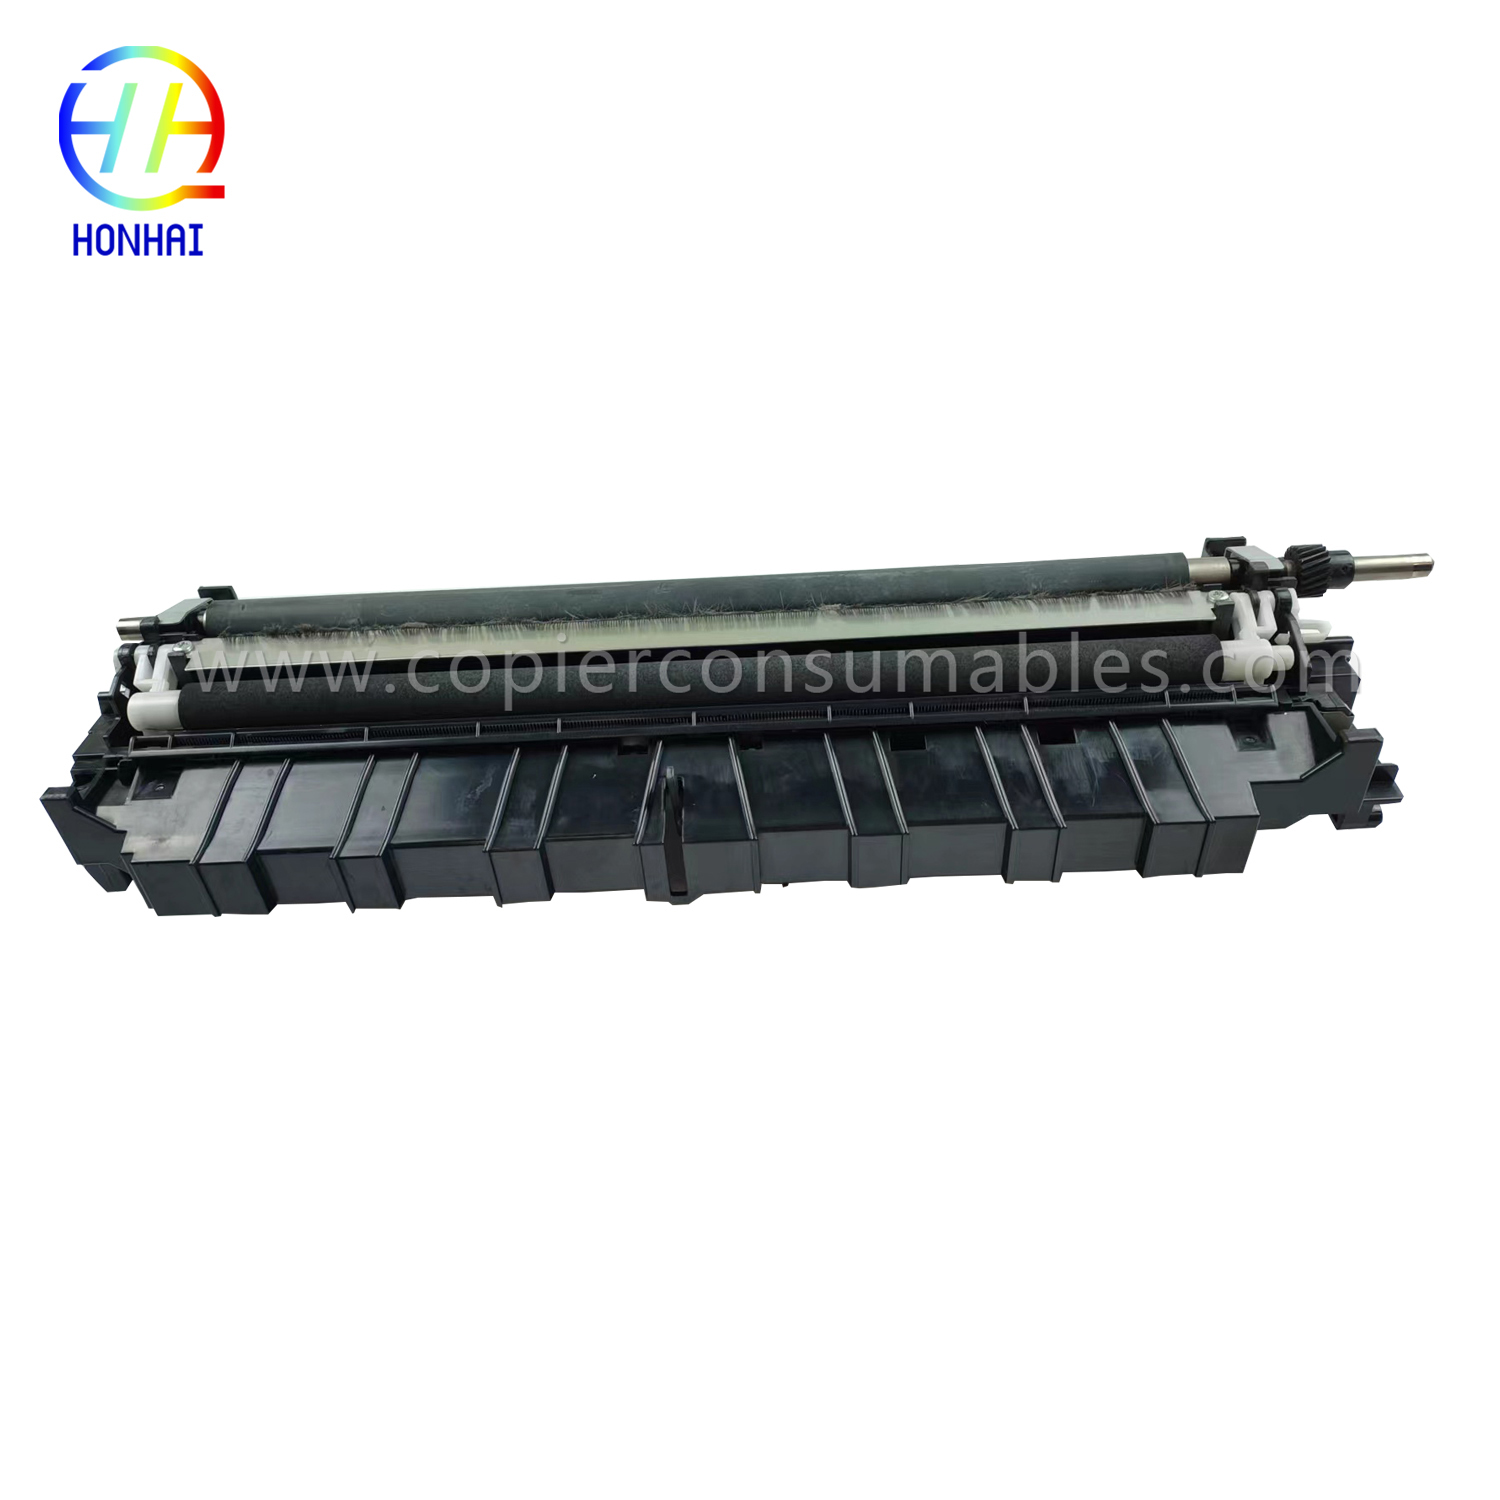 Newly Arrival Printer Roller Parts - Transfer Roller Assembly for Canon IR 2525 2520 FM4-9155-000 OEM – HONHAI